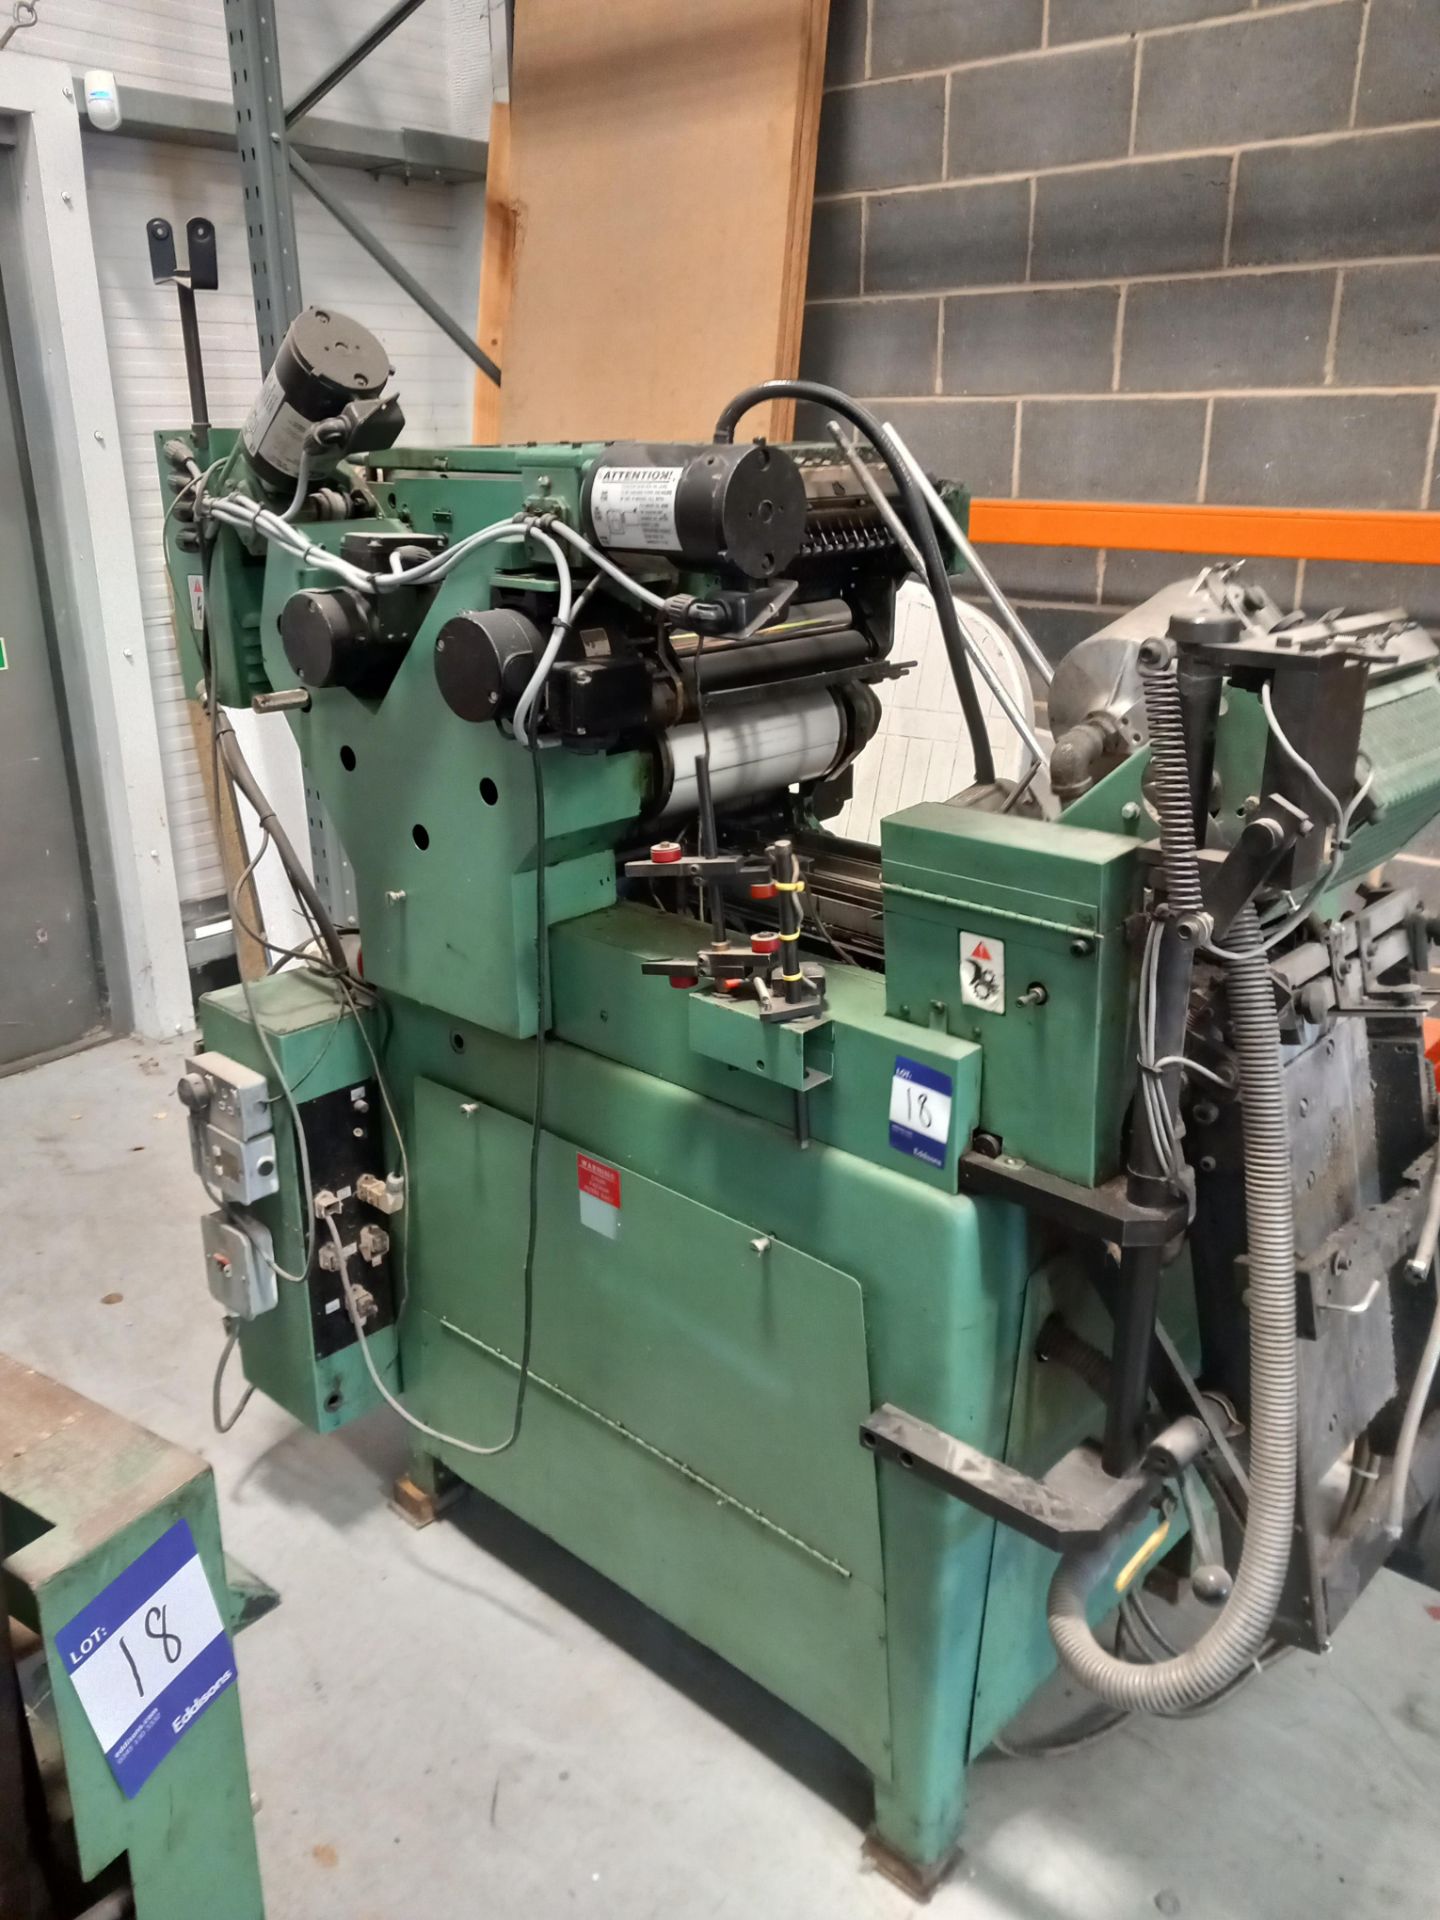 3 Halm jet press machines with selection of spares - Image 8 of 13